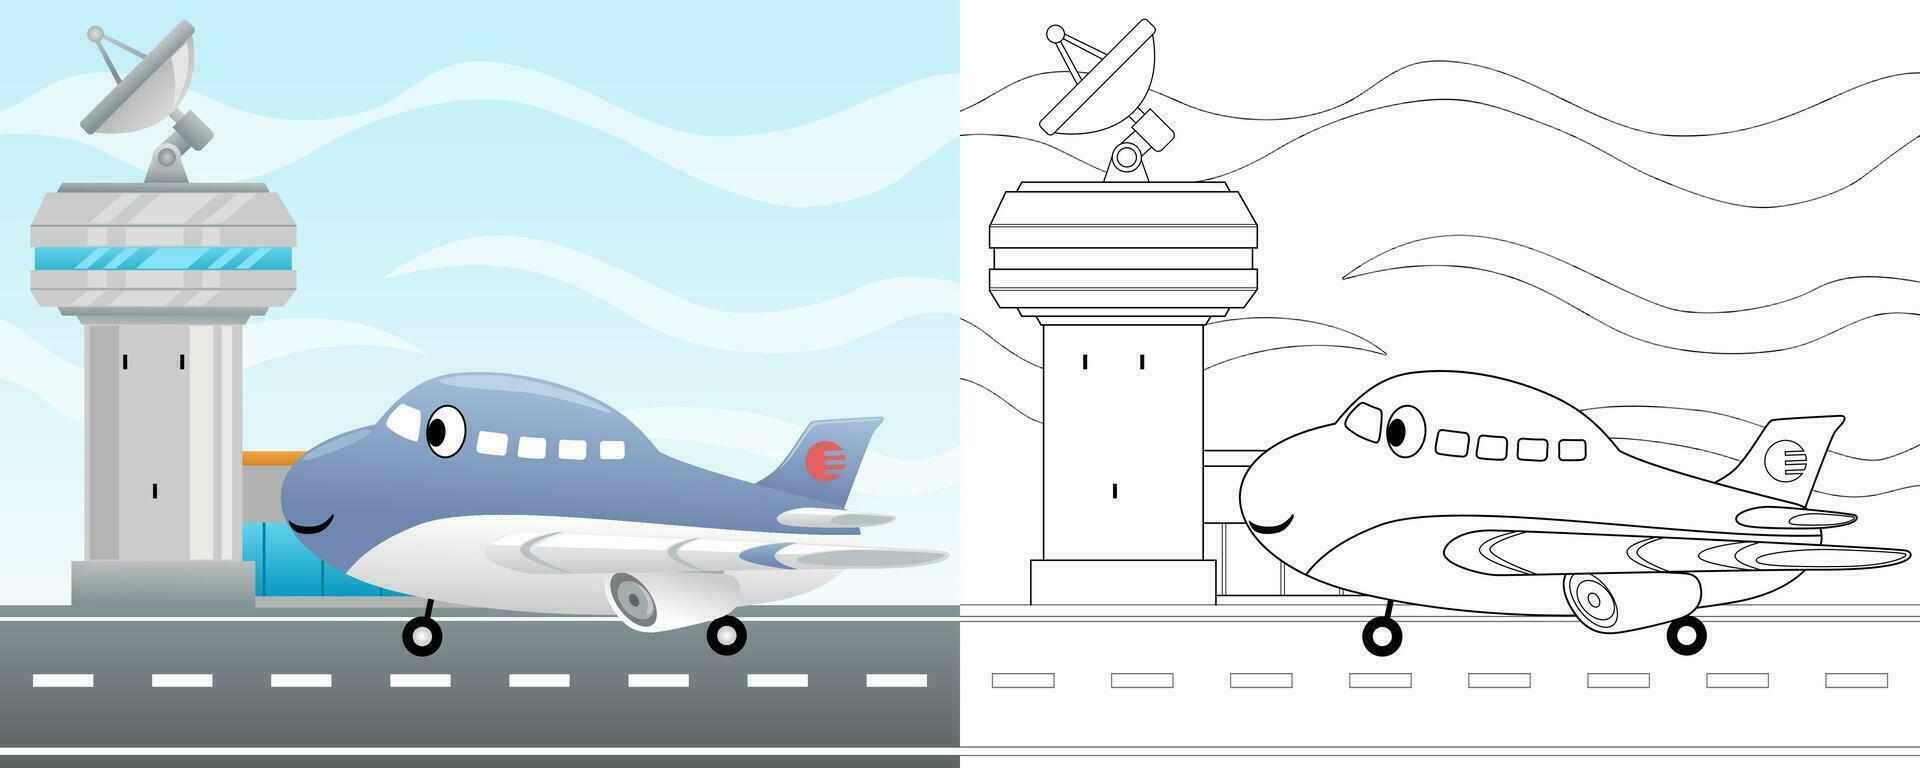 Vector illustration of cartoon funny airplane in airport. Coloring book or page for kids